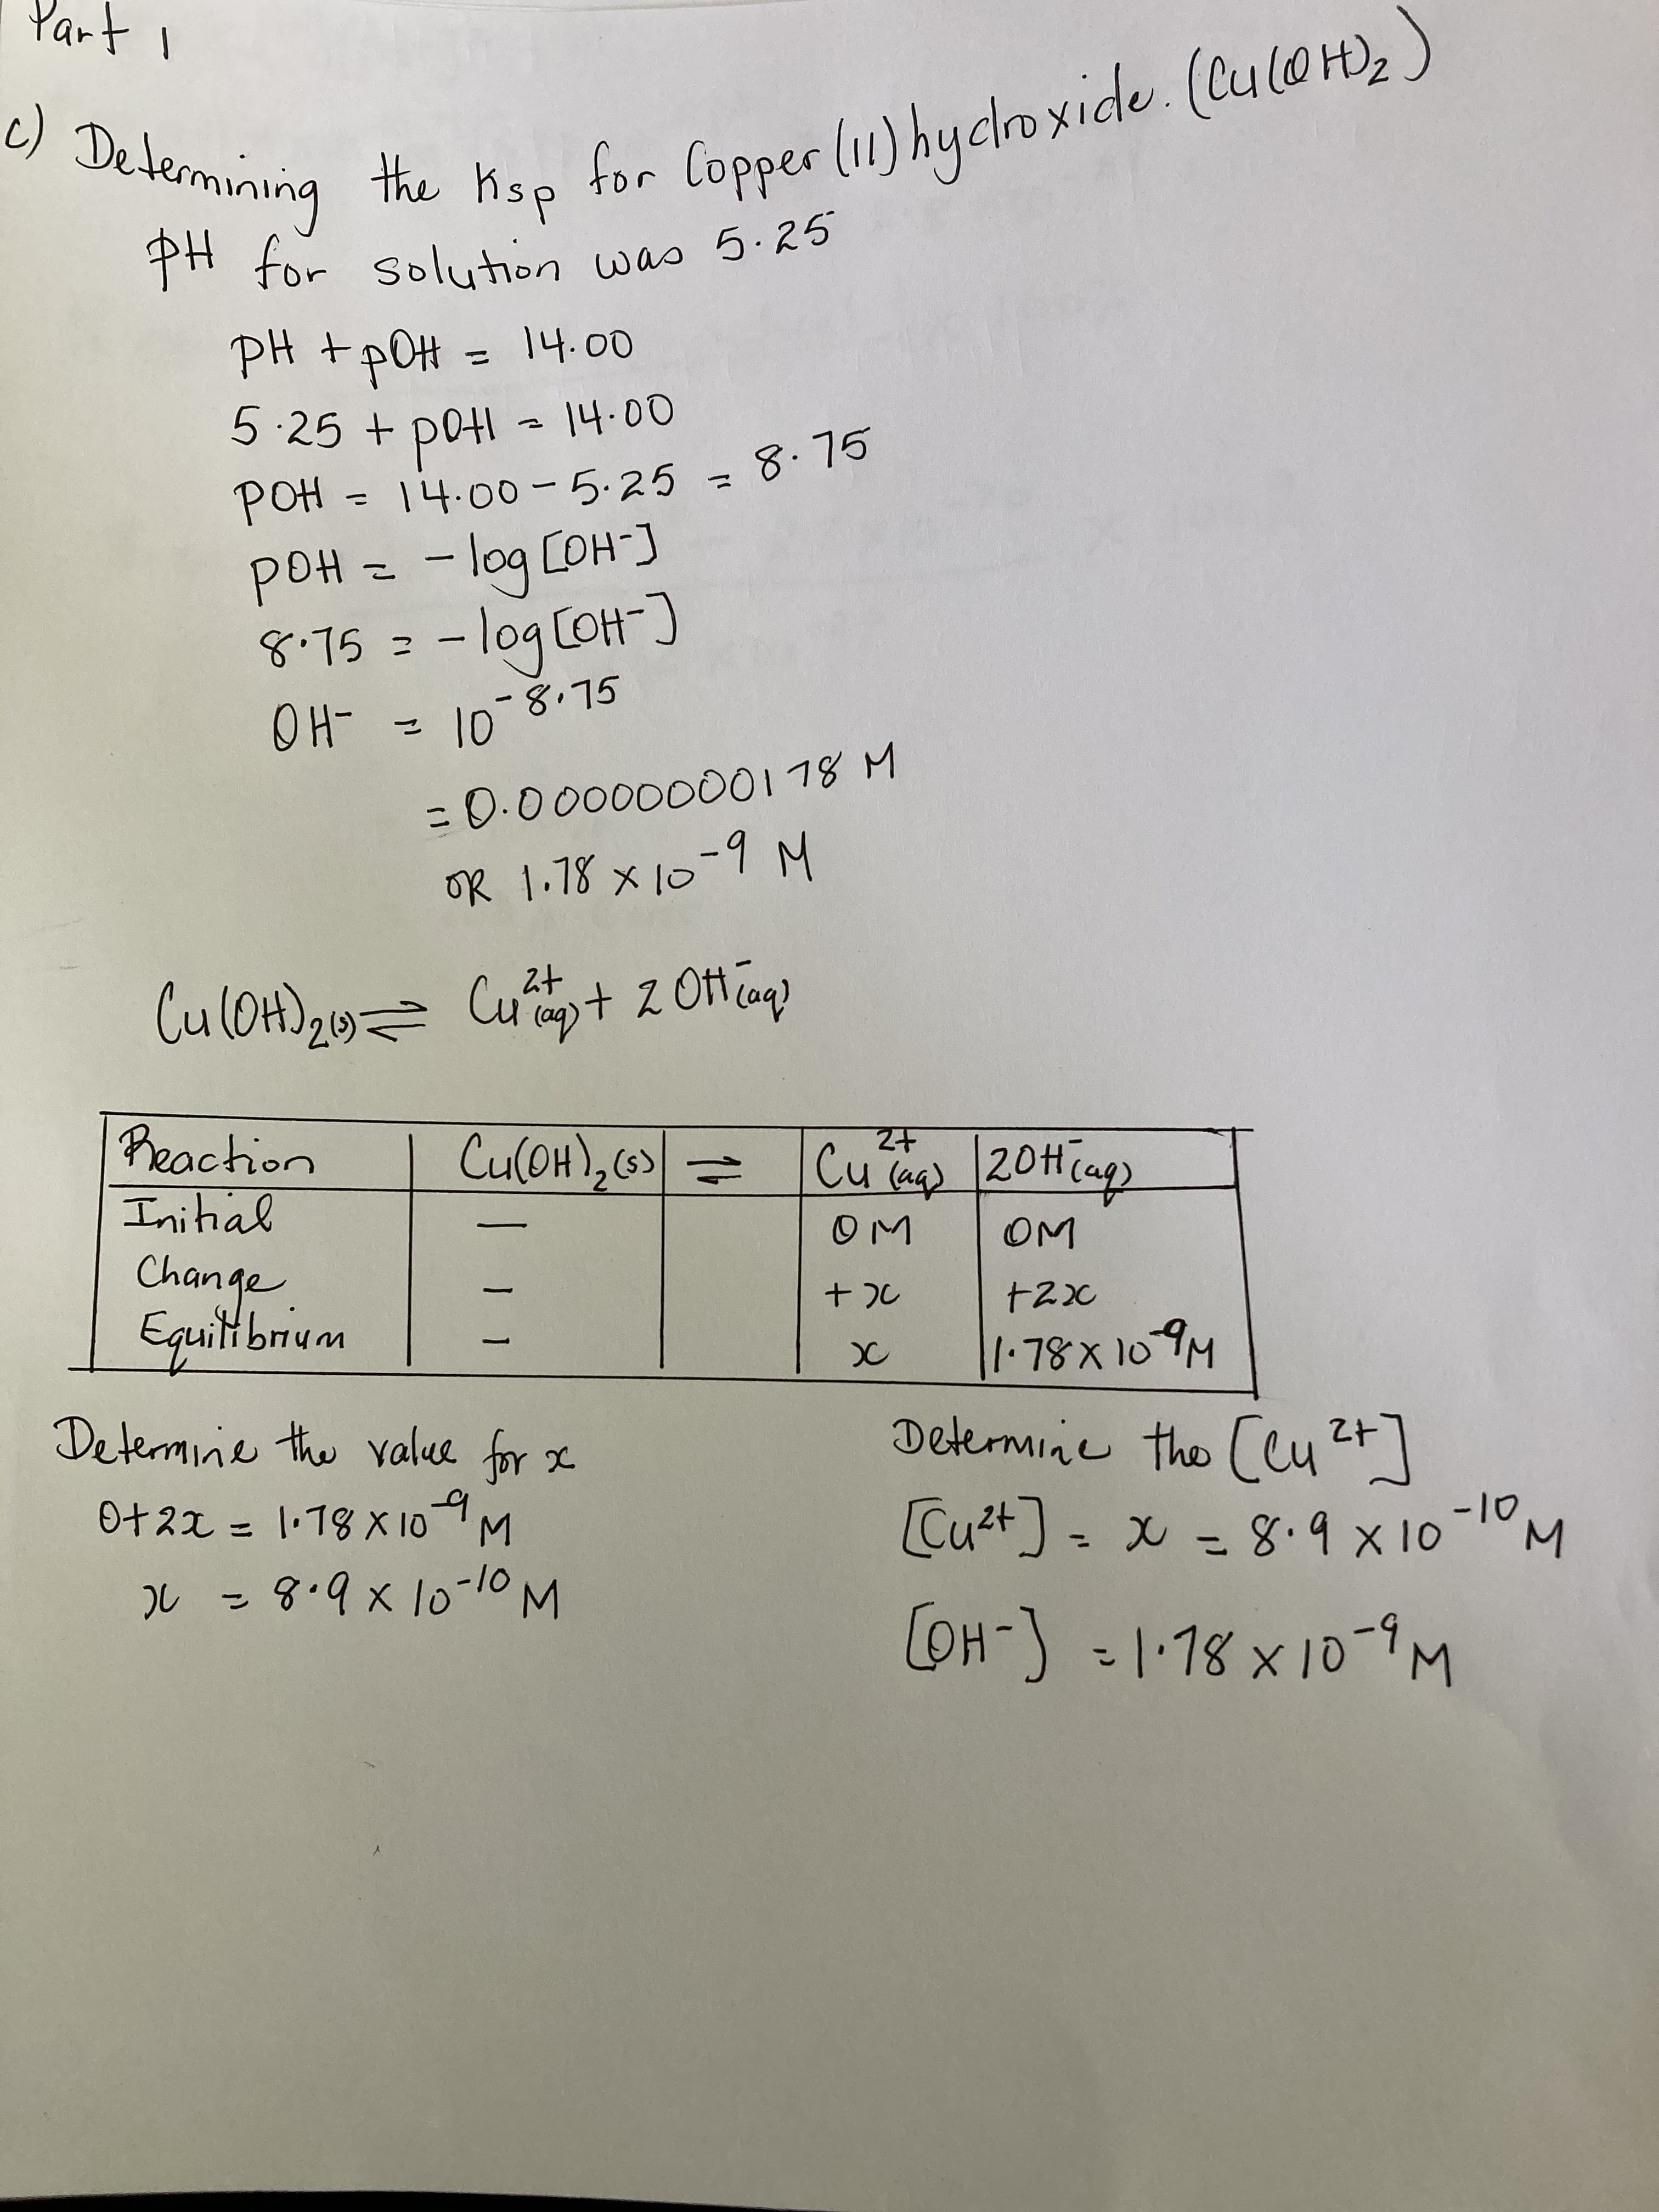 for Copper (11) hyclroxide. (CuloH), )
dsy myt
c) Determining
PH for solution was 5.2
PH +pOH = 14.00
Hod +
14.00-5.25 = 8.75
Hod
Hod
-log COH]
GL.8_0
8.75
C-HO)bo- =
01 = -HO
%3D
OR 1.78 x 10-9 M
Cuat 2 Oft cag)
Cu(OH),(6)
十Z
Cu Ta) 20H(ap)
Initial
Change
Equitbrium
2.
Determinie the value for x
Determine the Ccut]
O+ 22 = 1·18 X 10M
Cu2t - x - 8.9x10-1M
3.
